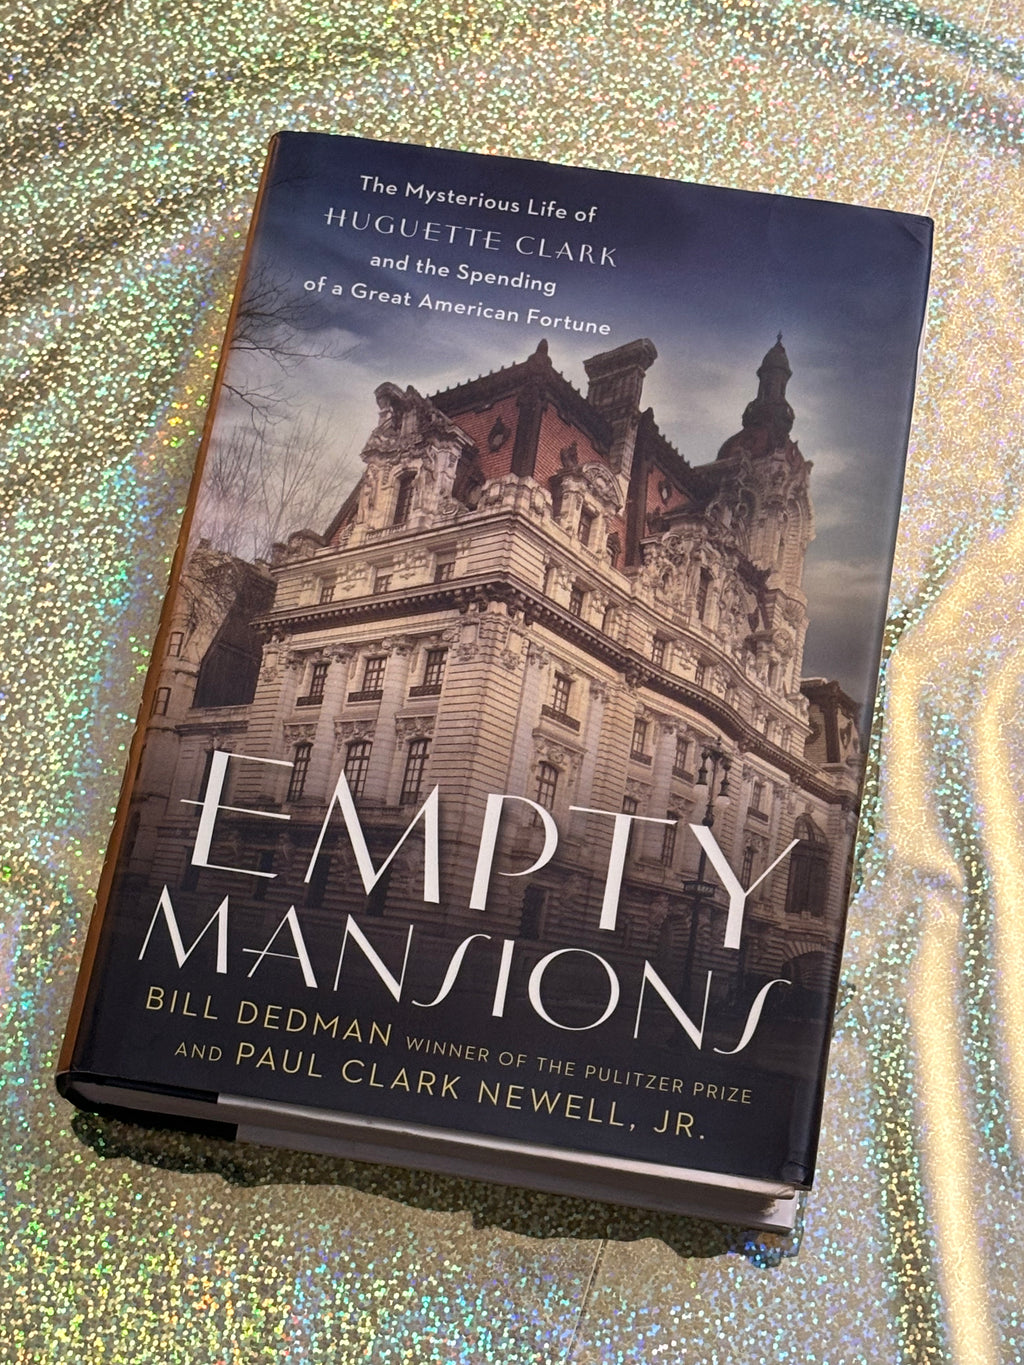 Empty Mansions: The Mysterious LIfe of Huguette Clark and the Spending of a Great American Fortune- By Bill Dedman and Paul Clark Newell, JR.